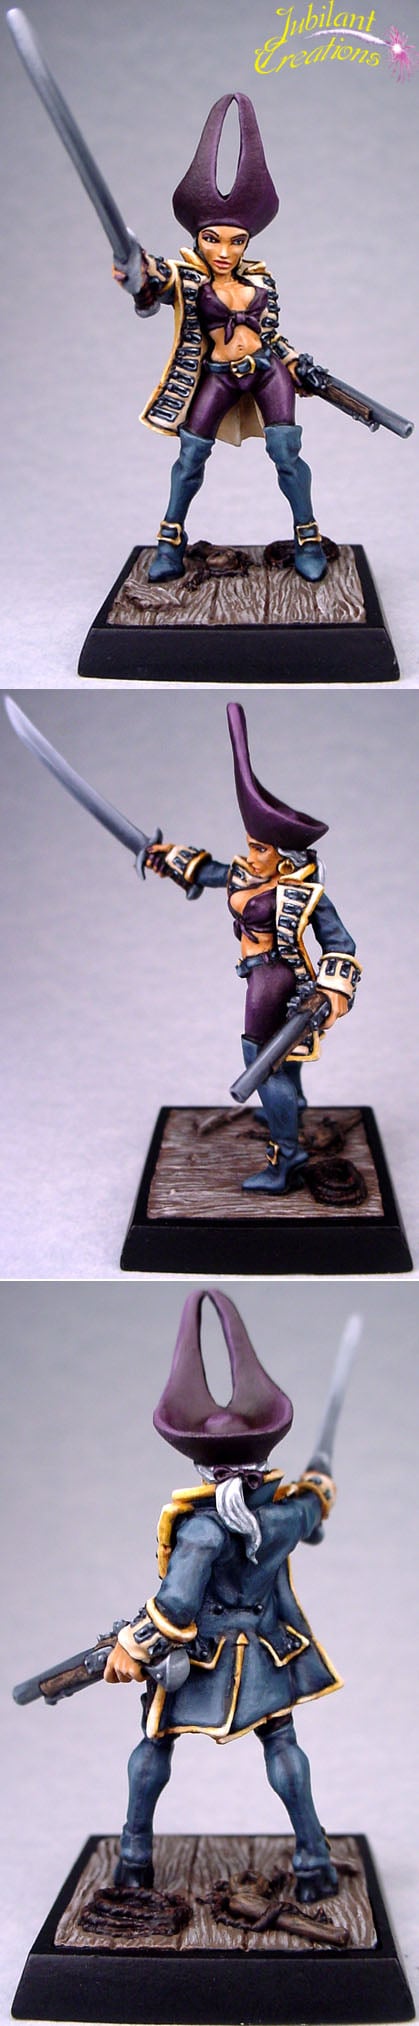 Image of Freebooter Pirate Queen & Assistant